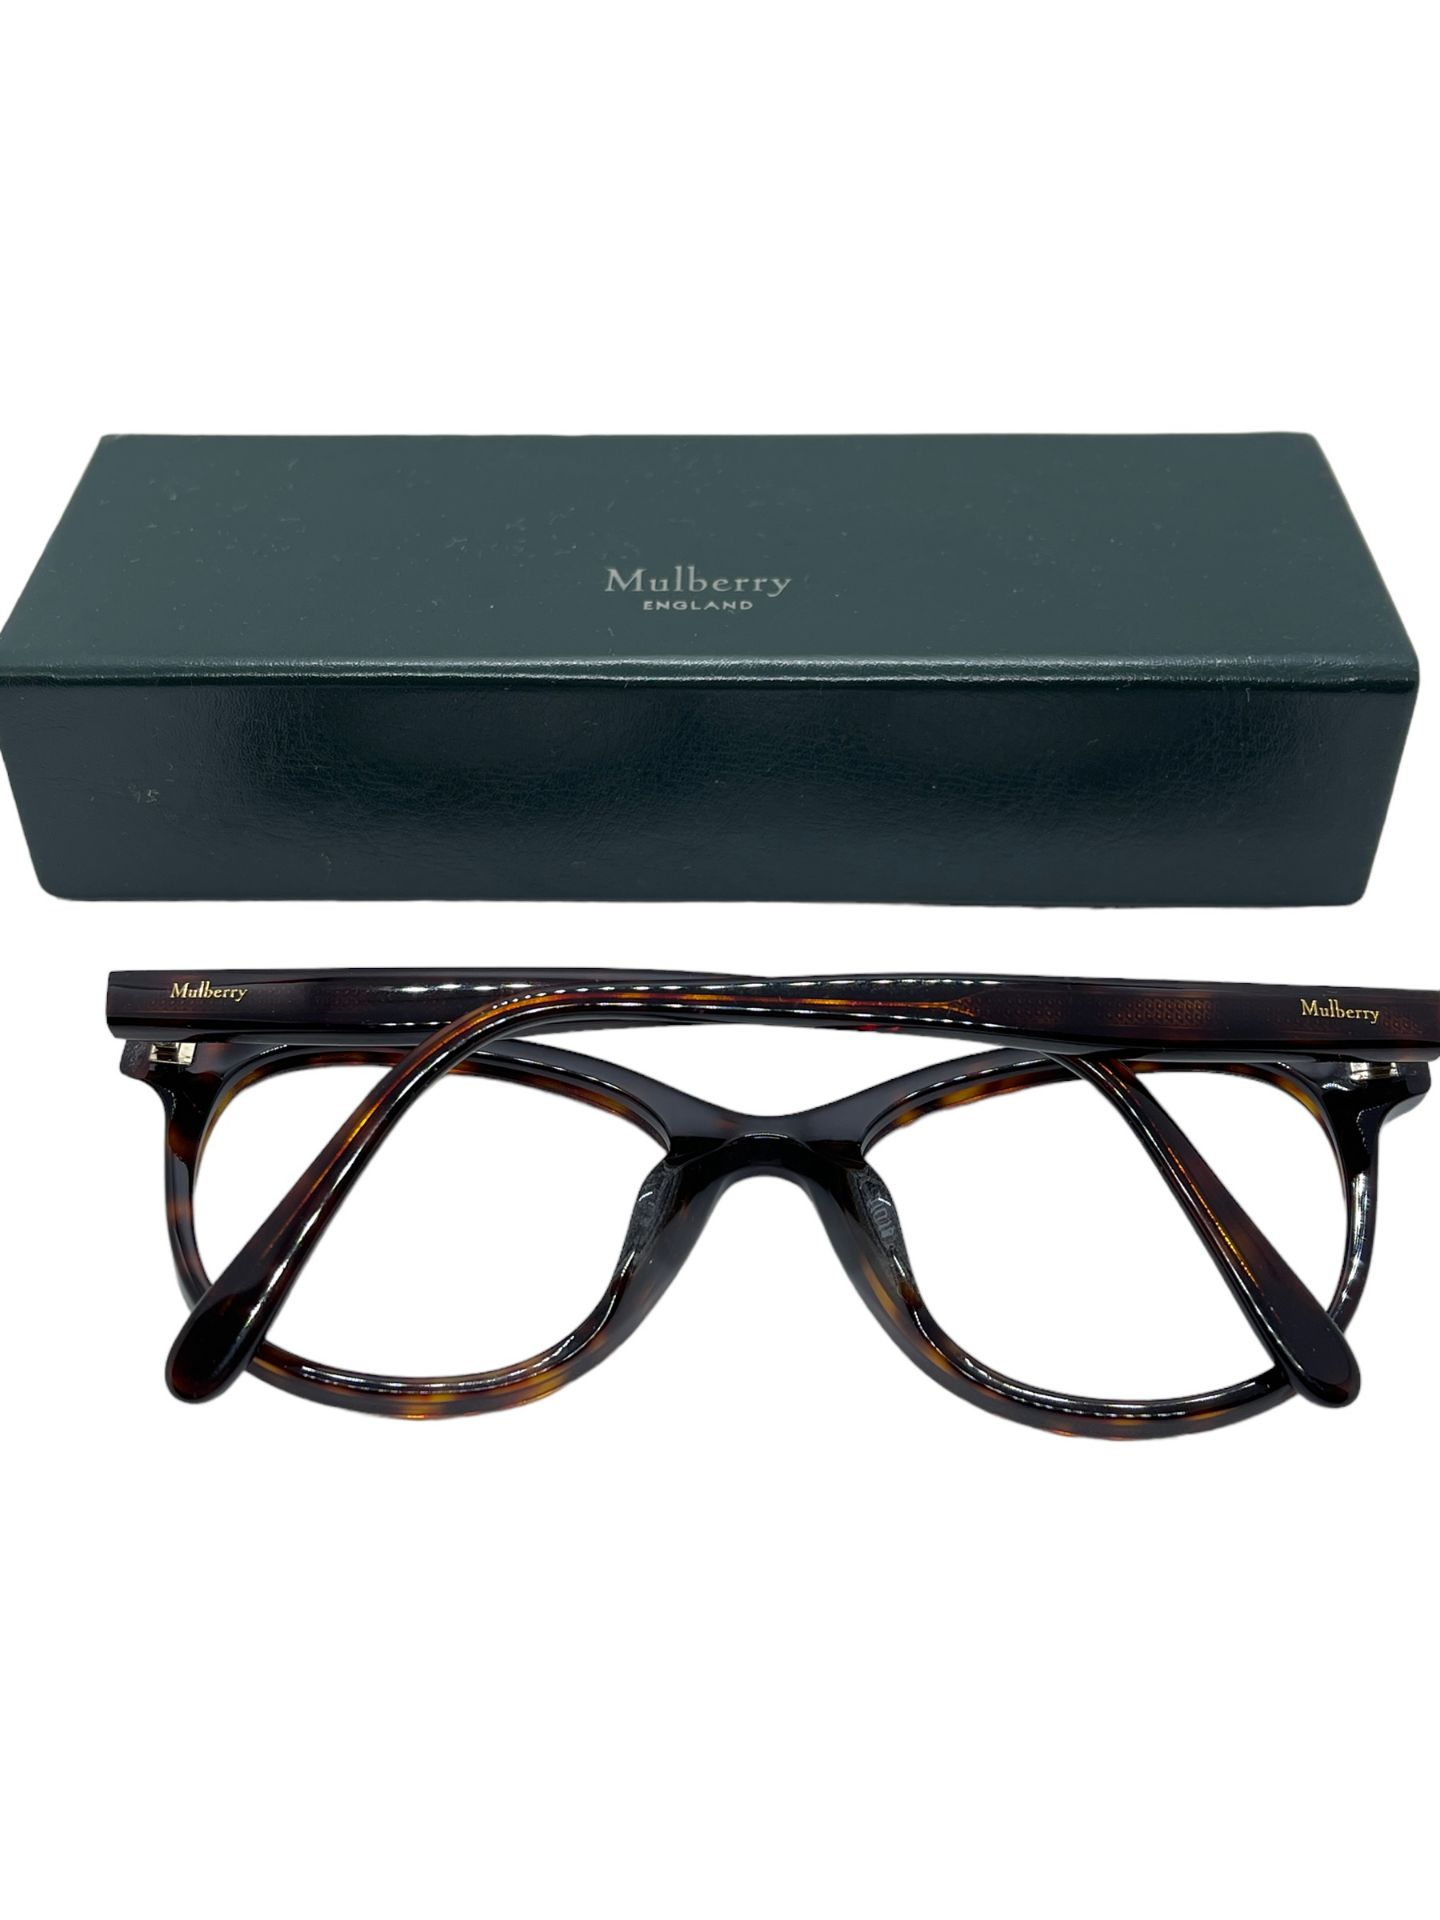 Mulberry Specticals xdemo boxed case unisex - Image 6 of 6